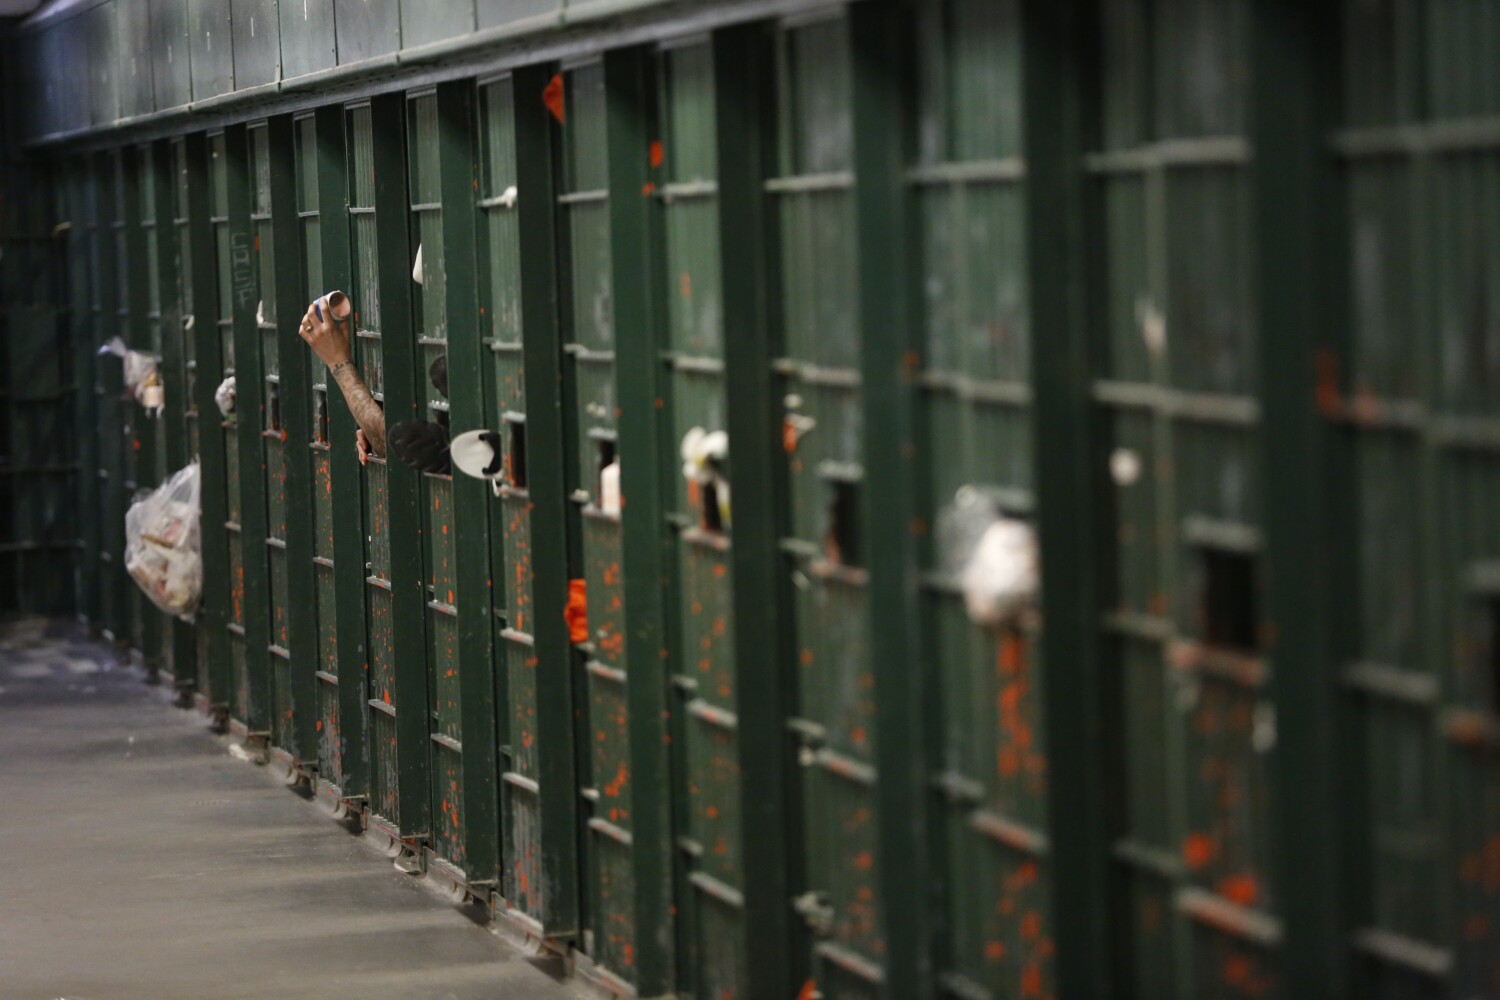 A man wasn't given a bed in L.A. County jails for 2 nights. A judge just declared a mistrial